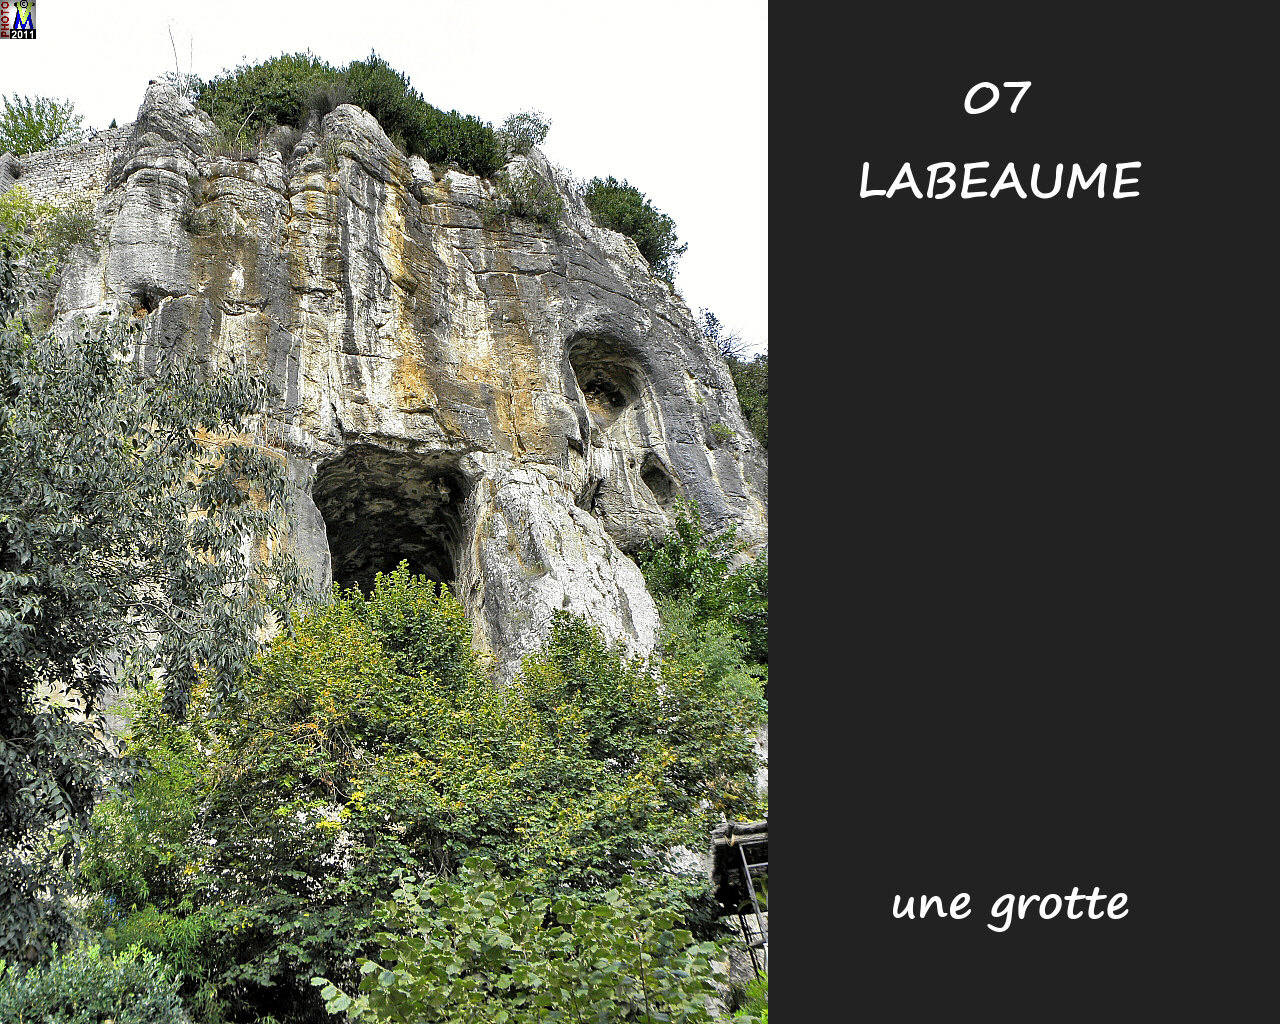 07LABEAUME_grotte_102.jpg